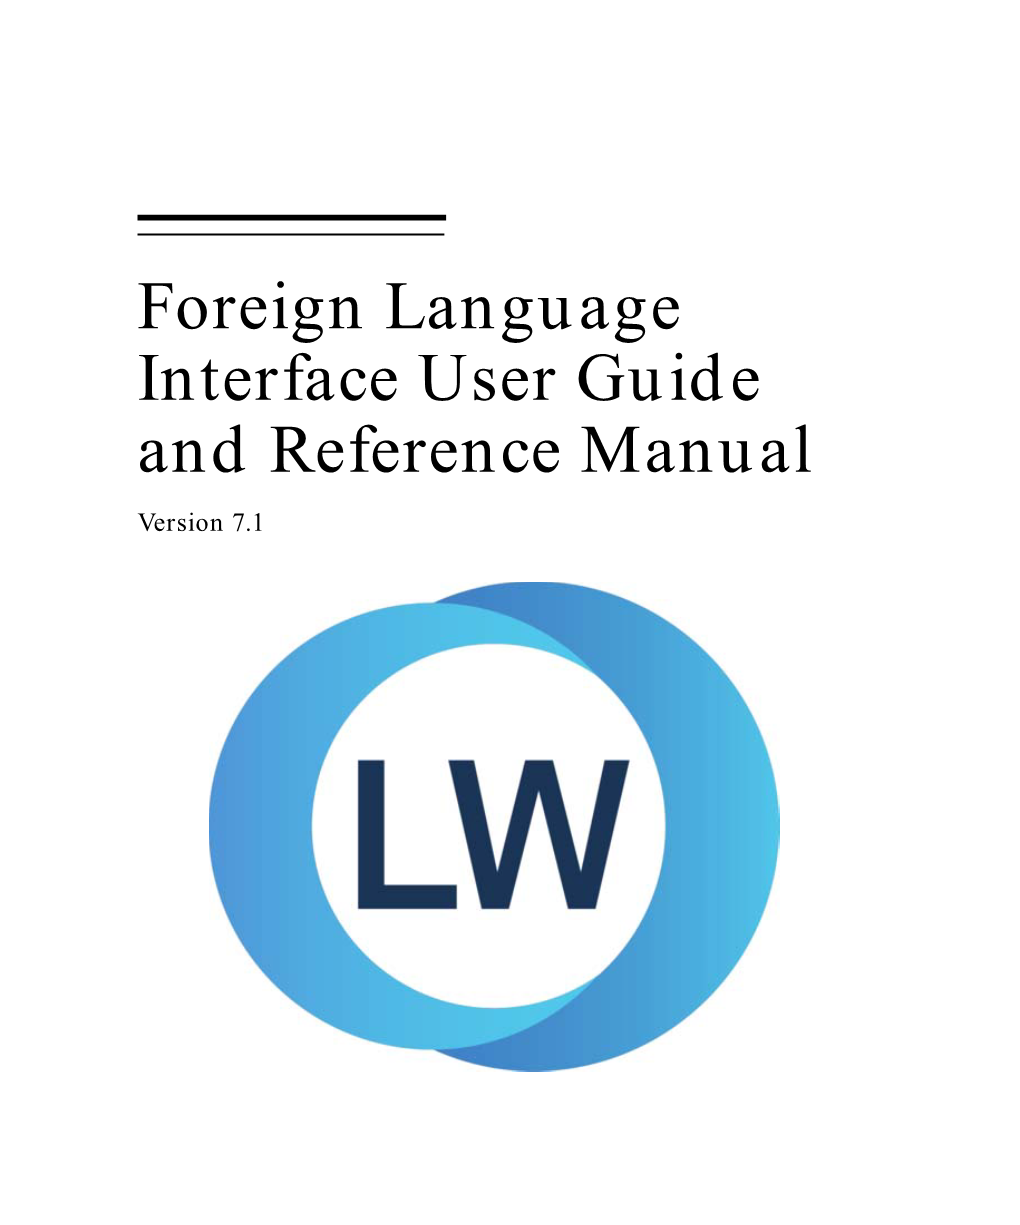 Foreign Language Interface User Guide and Reference Manual